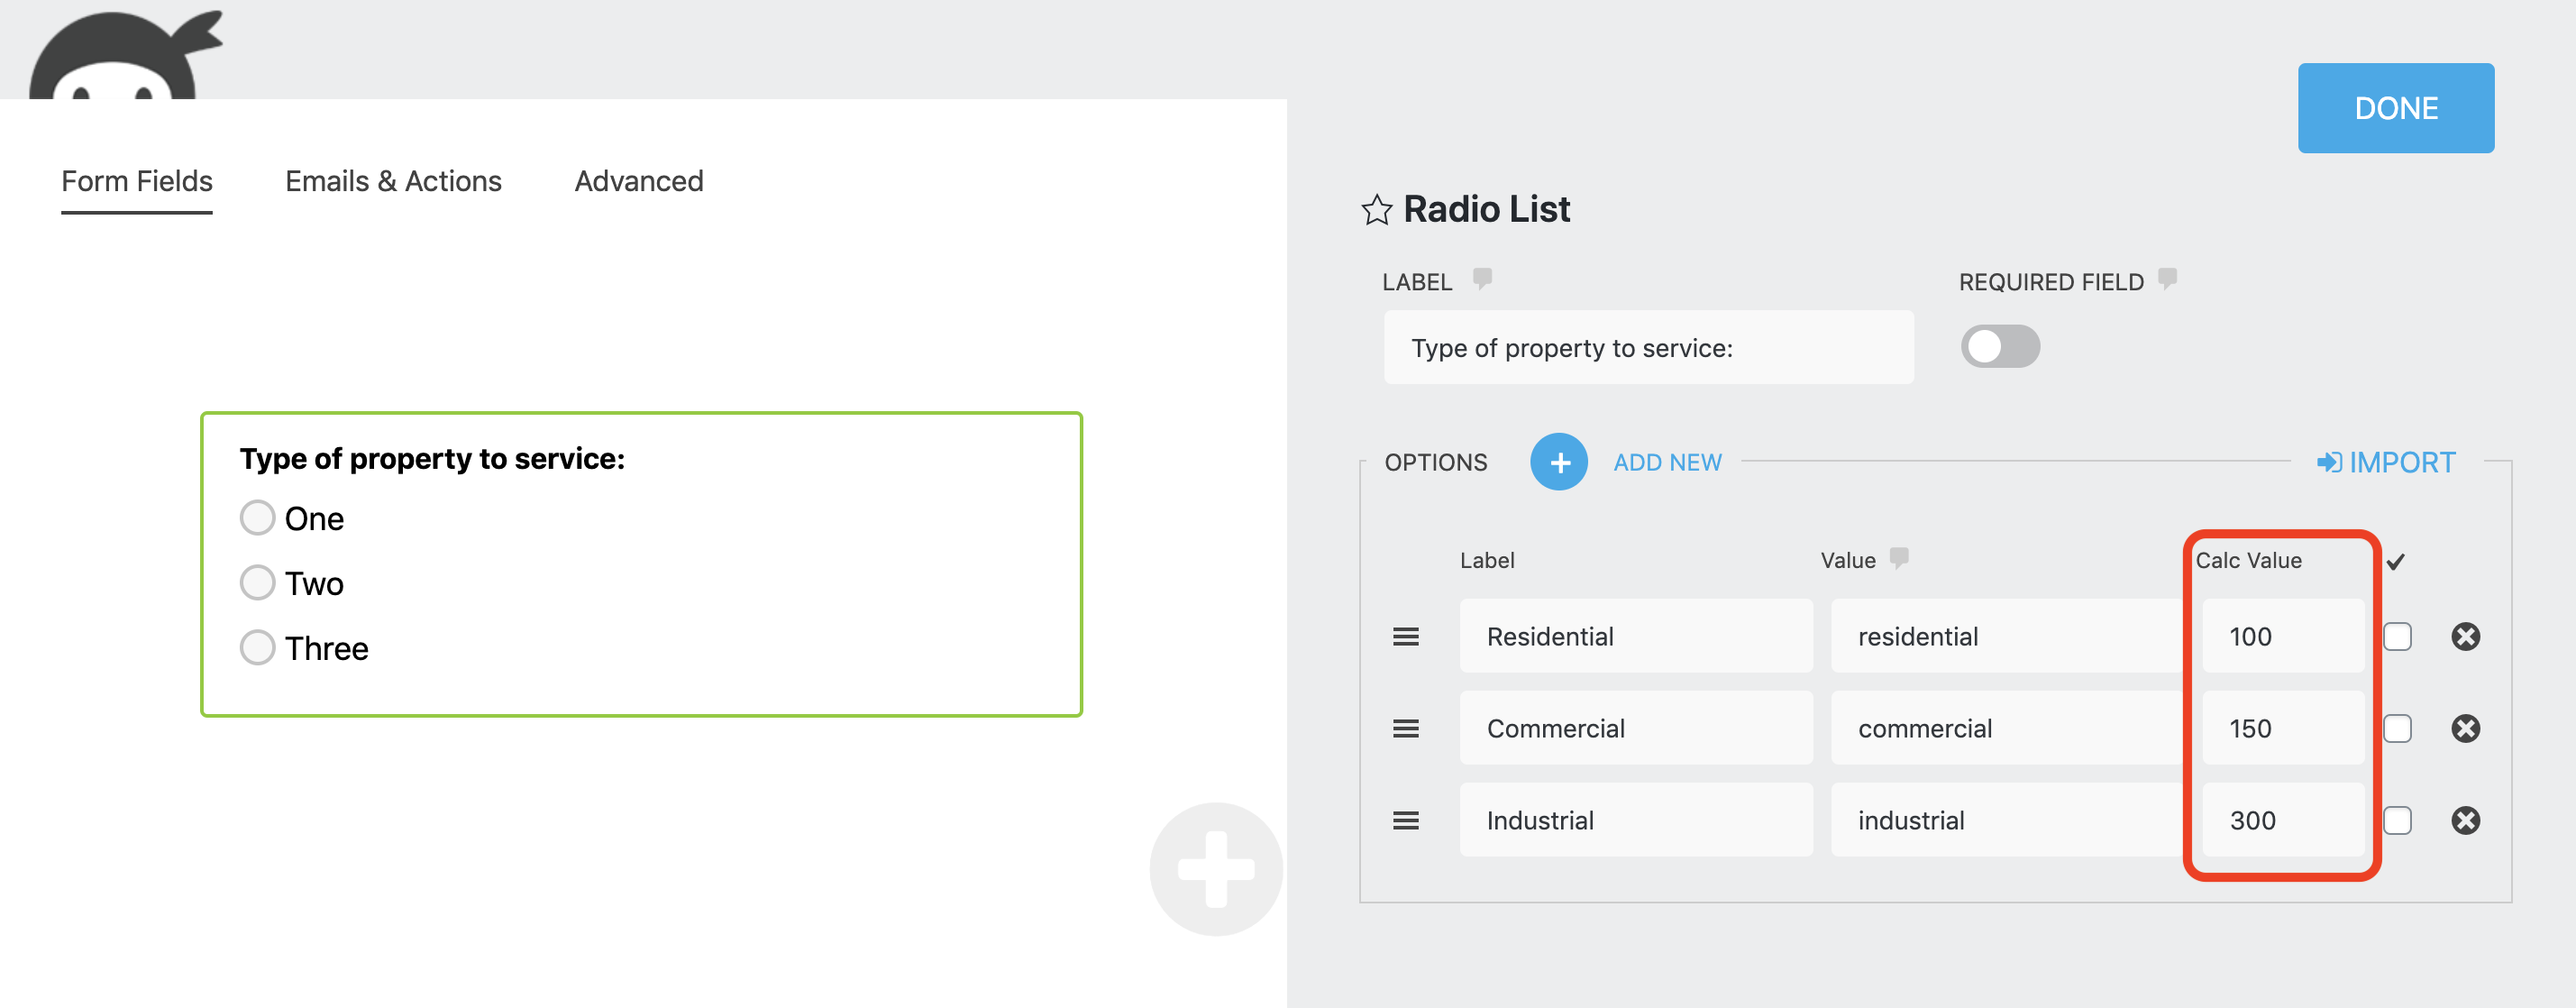 calc value settings in a radio field thatv allow for different prices to be assigned to specific options for the request quote form for wordpress